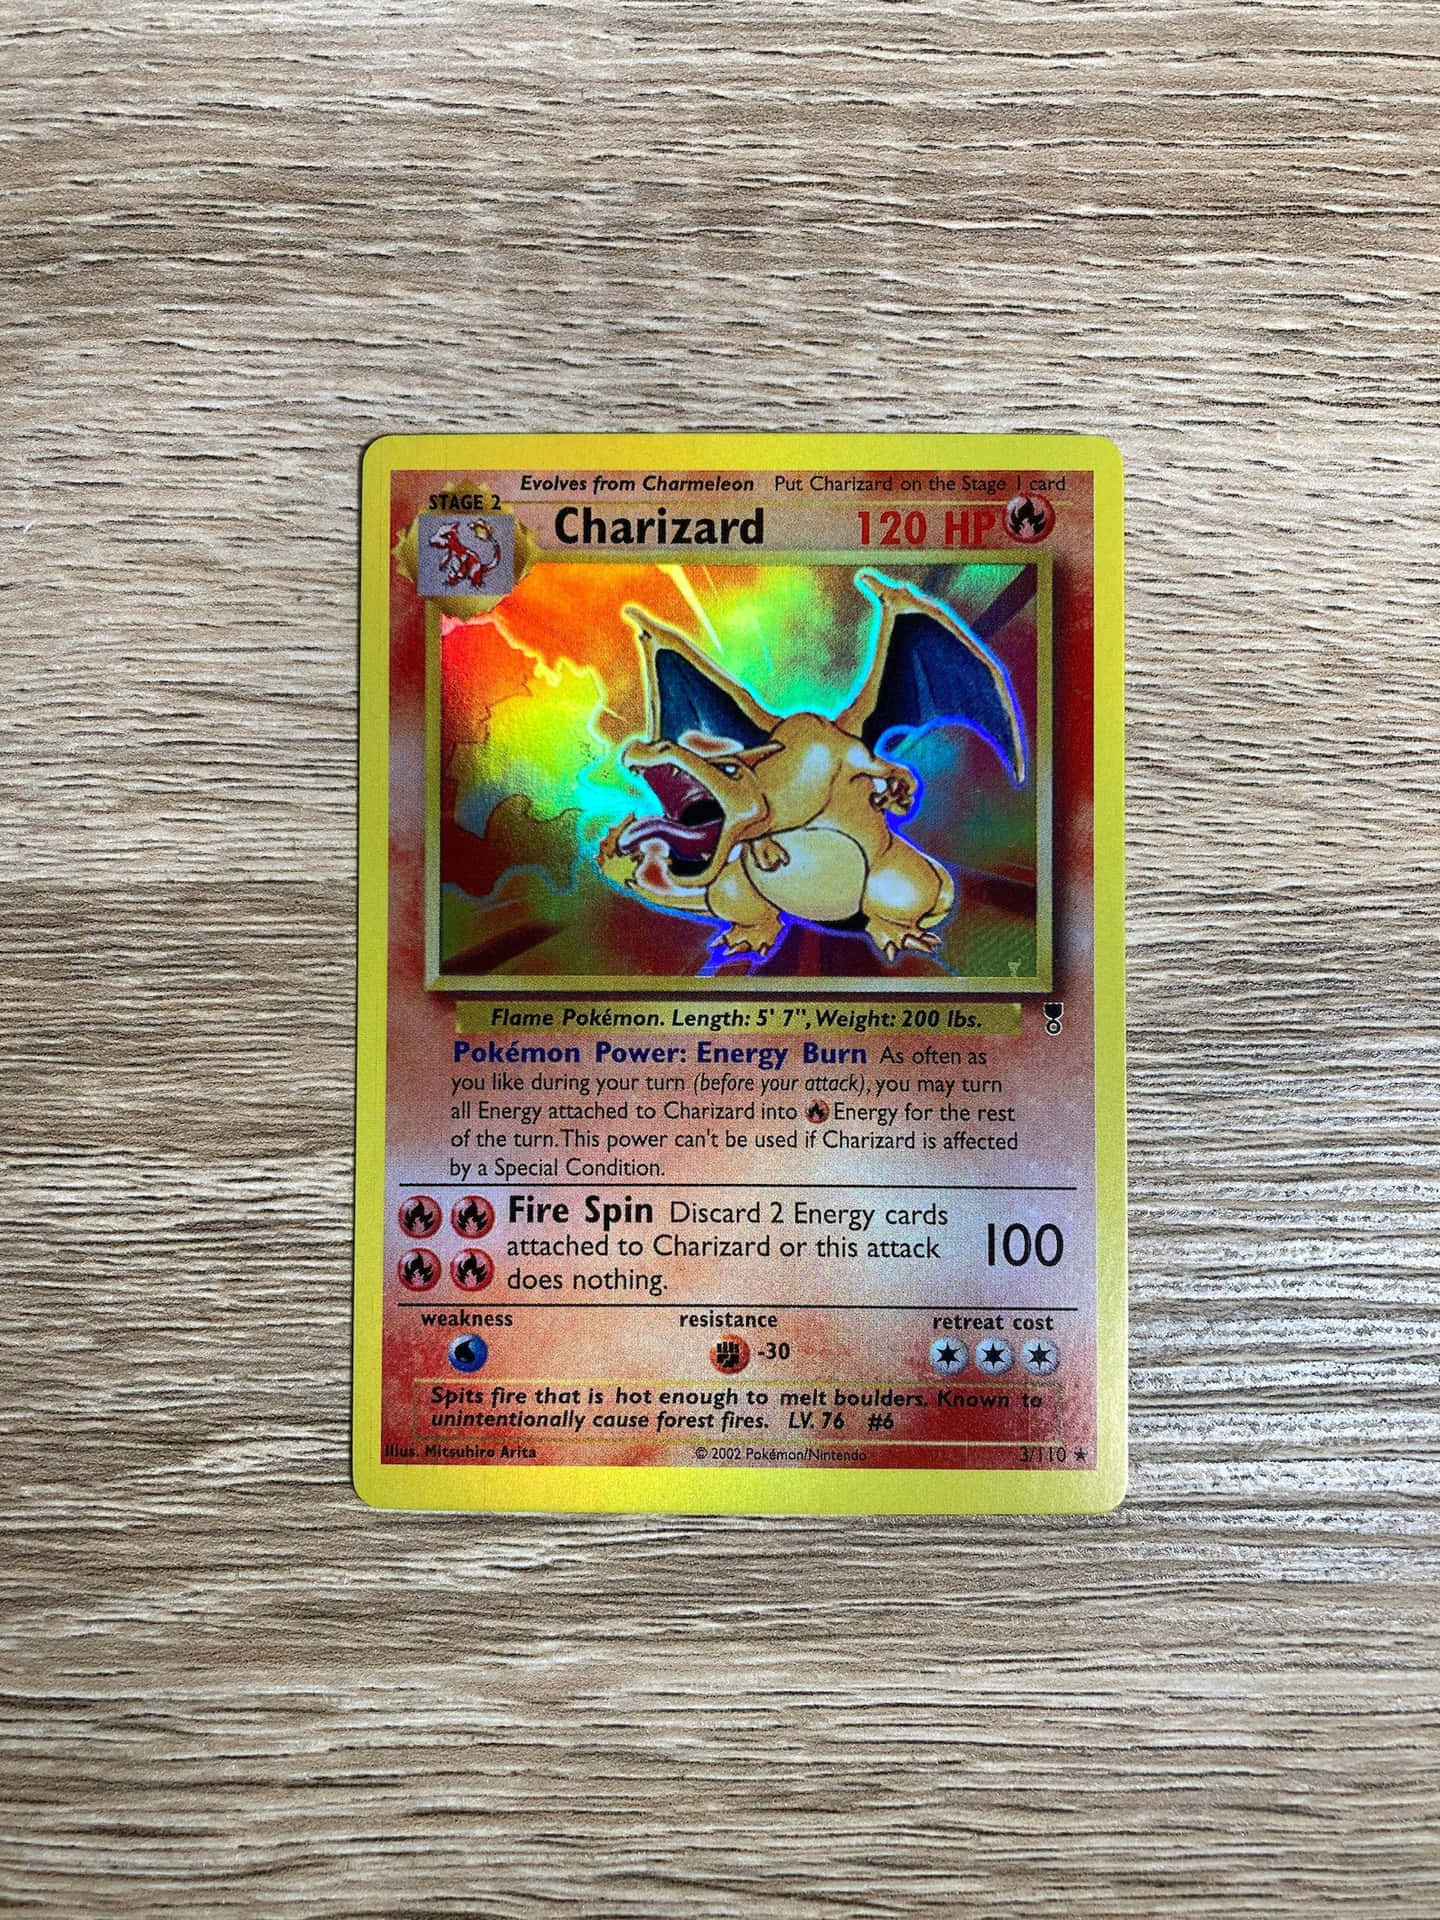 Enjoy the Trading Card Rush with Collectible Pokemon Cards!